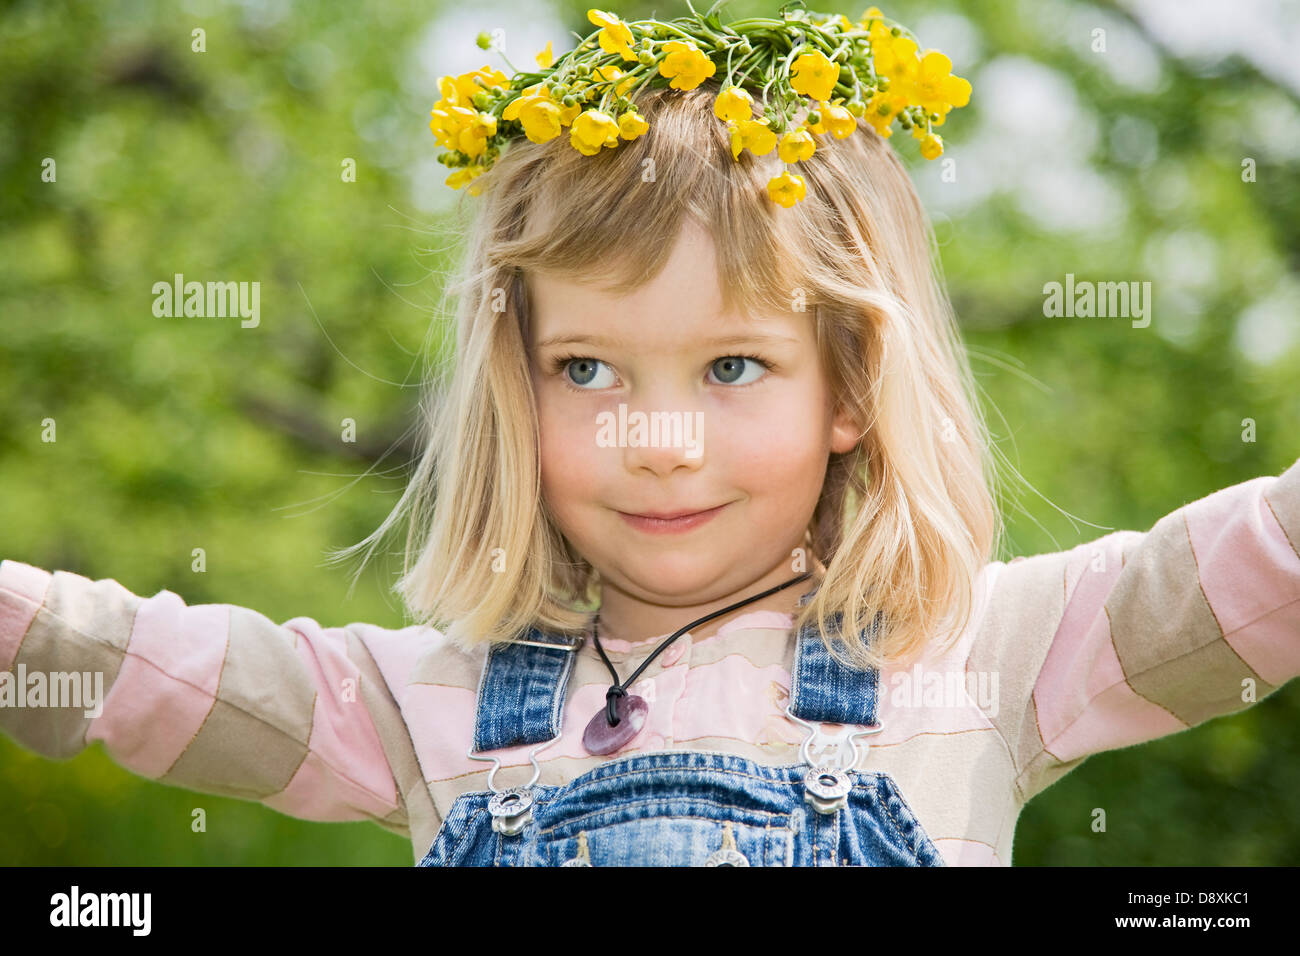 Four year-old girl with a wreath of flowers on her head Stock Photo